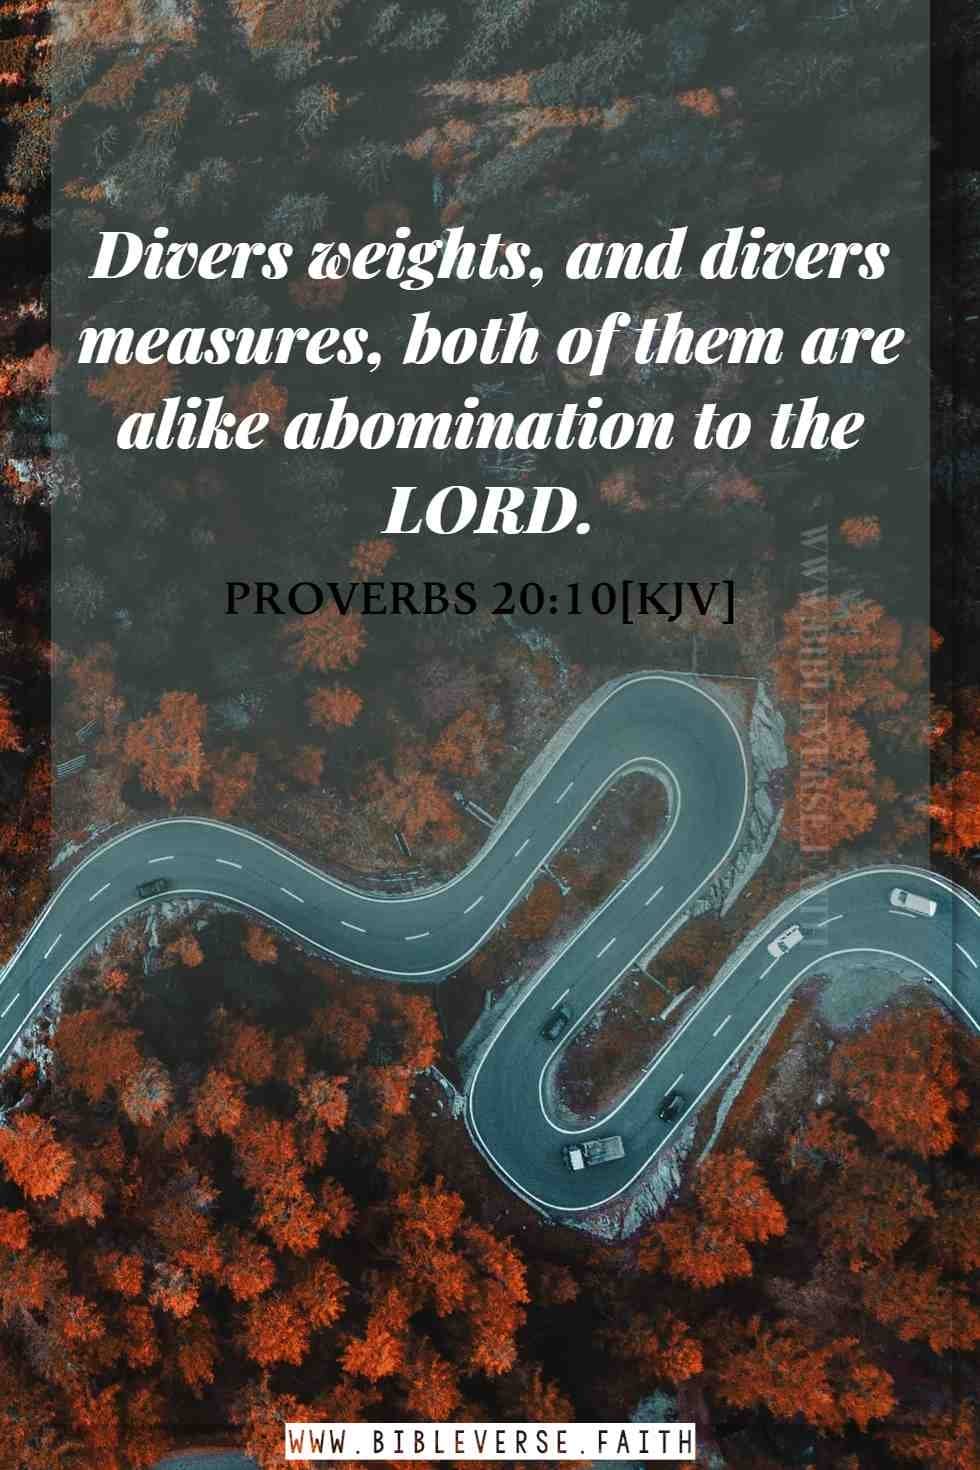 proverbs 20 10[kjv] abomination in the bible